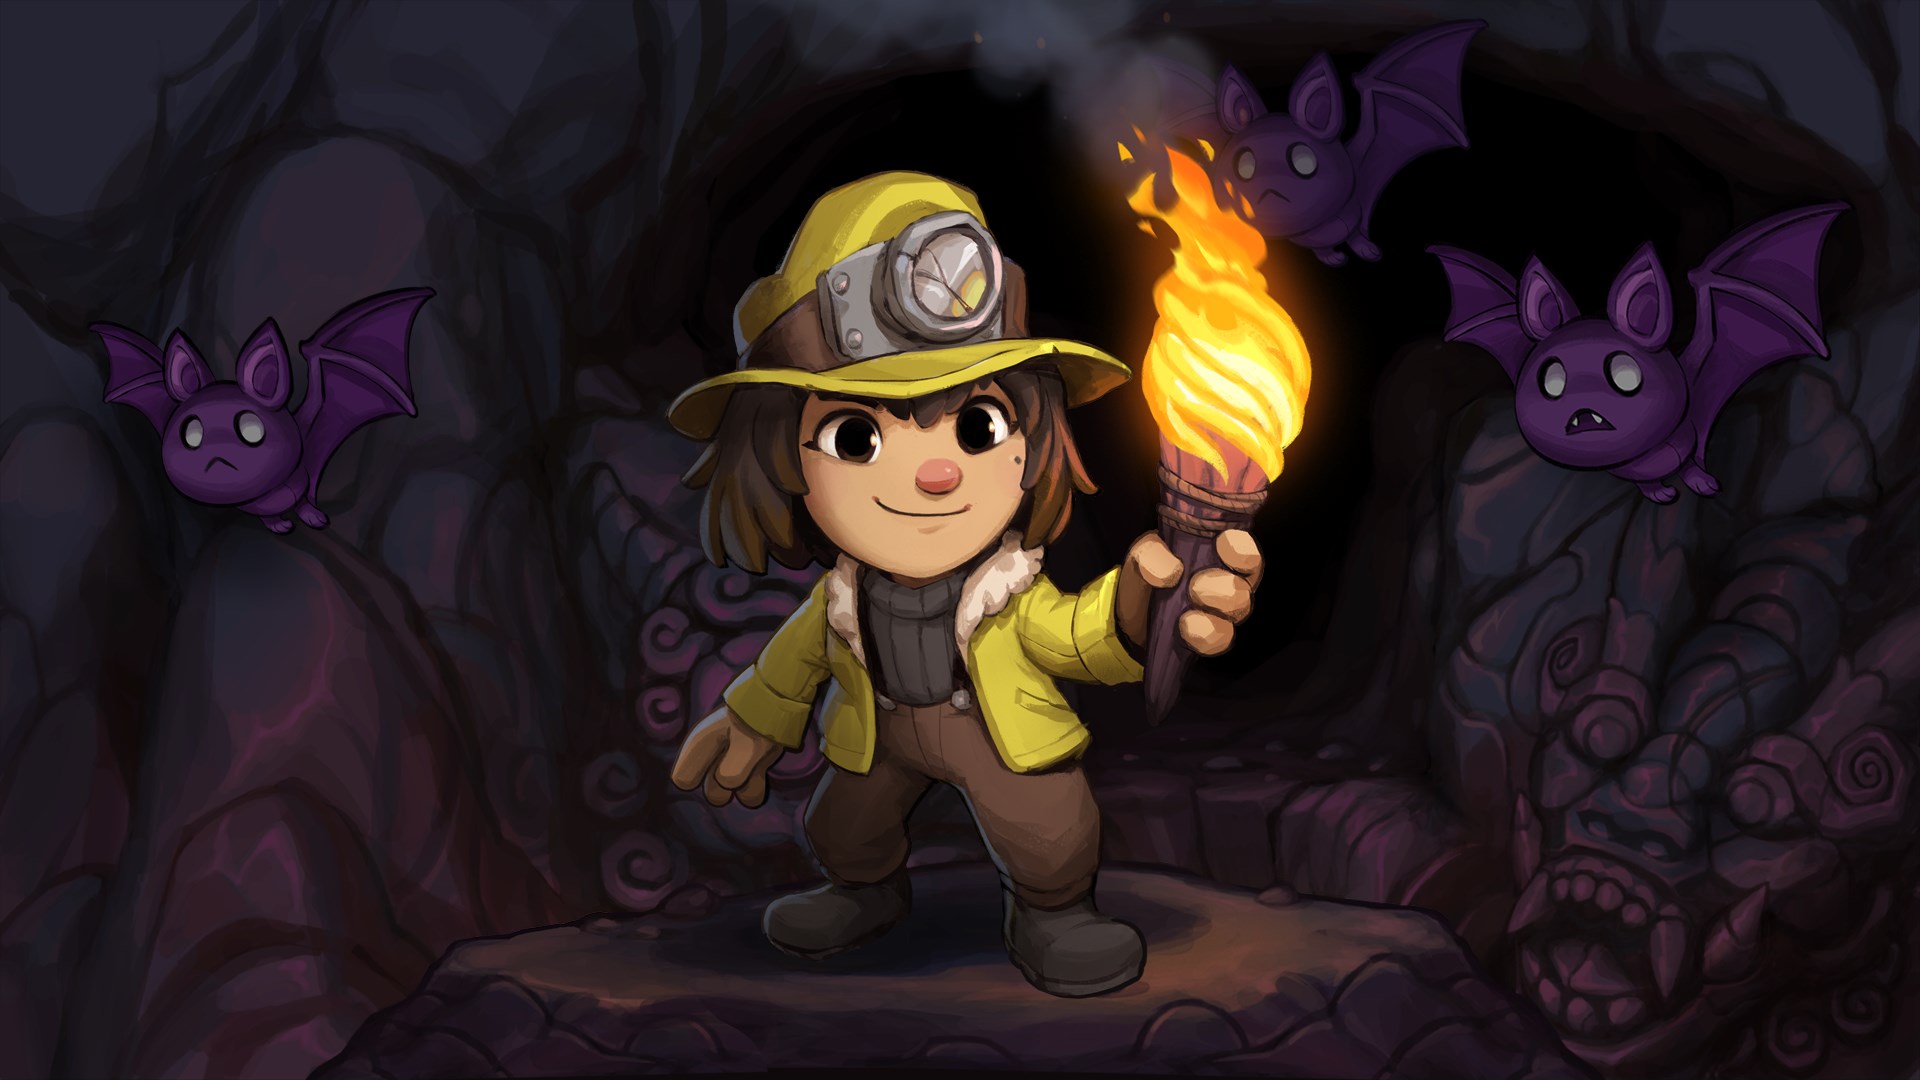 Video For Spelunky 2 Is Now Available For PC, Xbox One, And Xbox Series X|S (Xbox Game Pass)